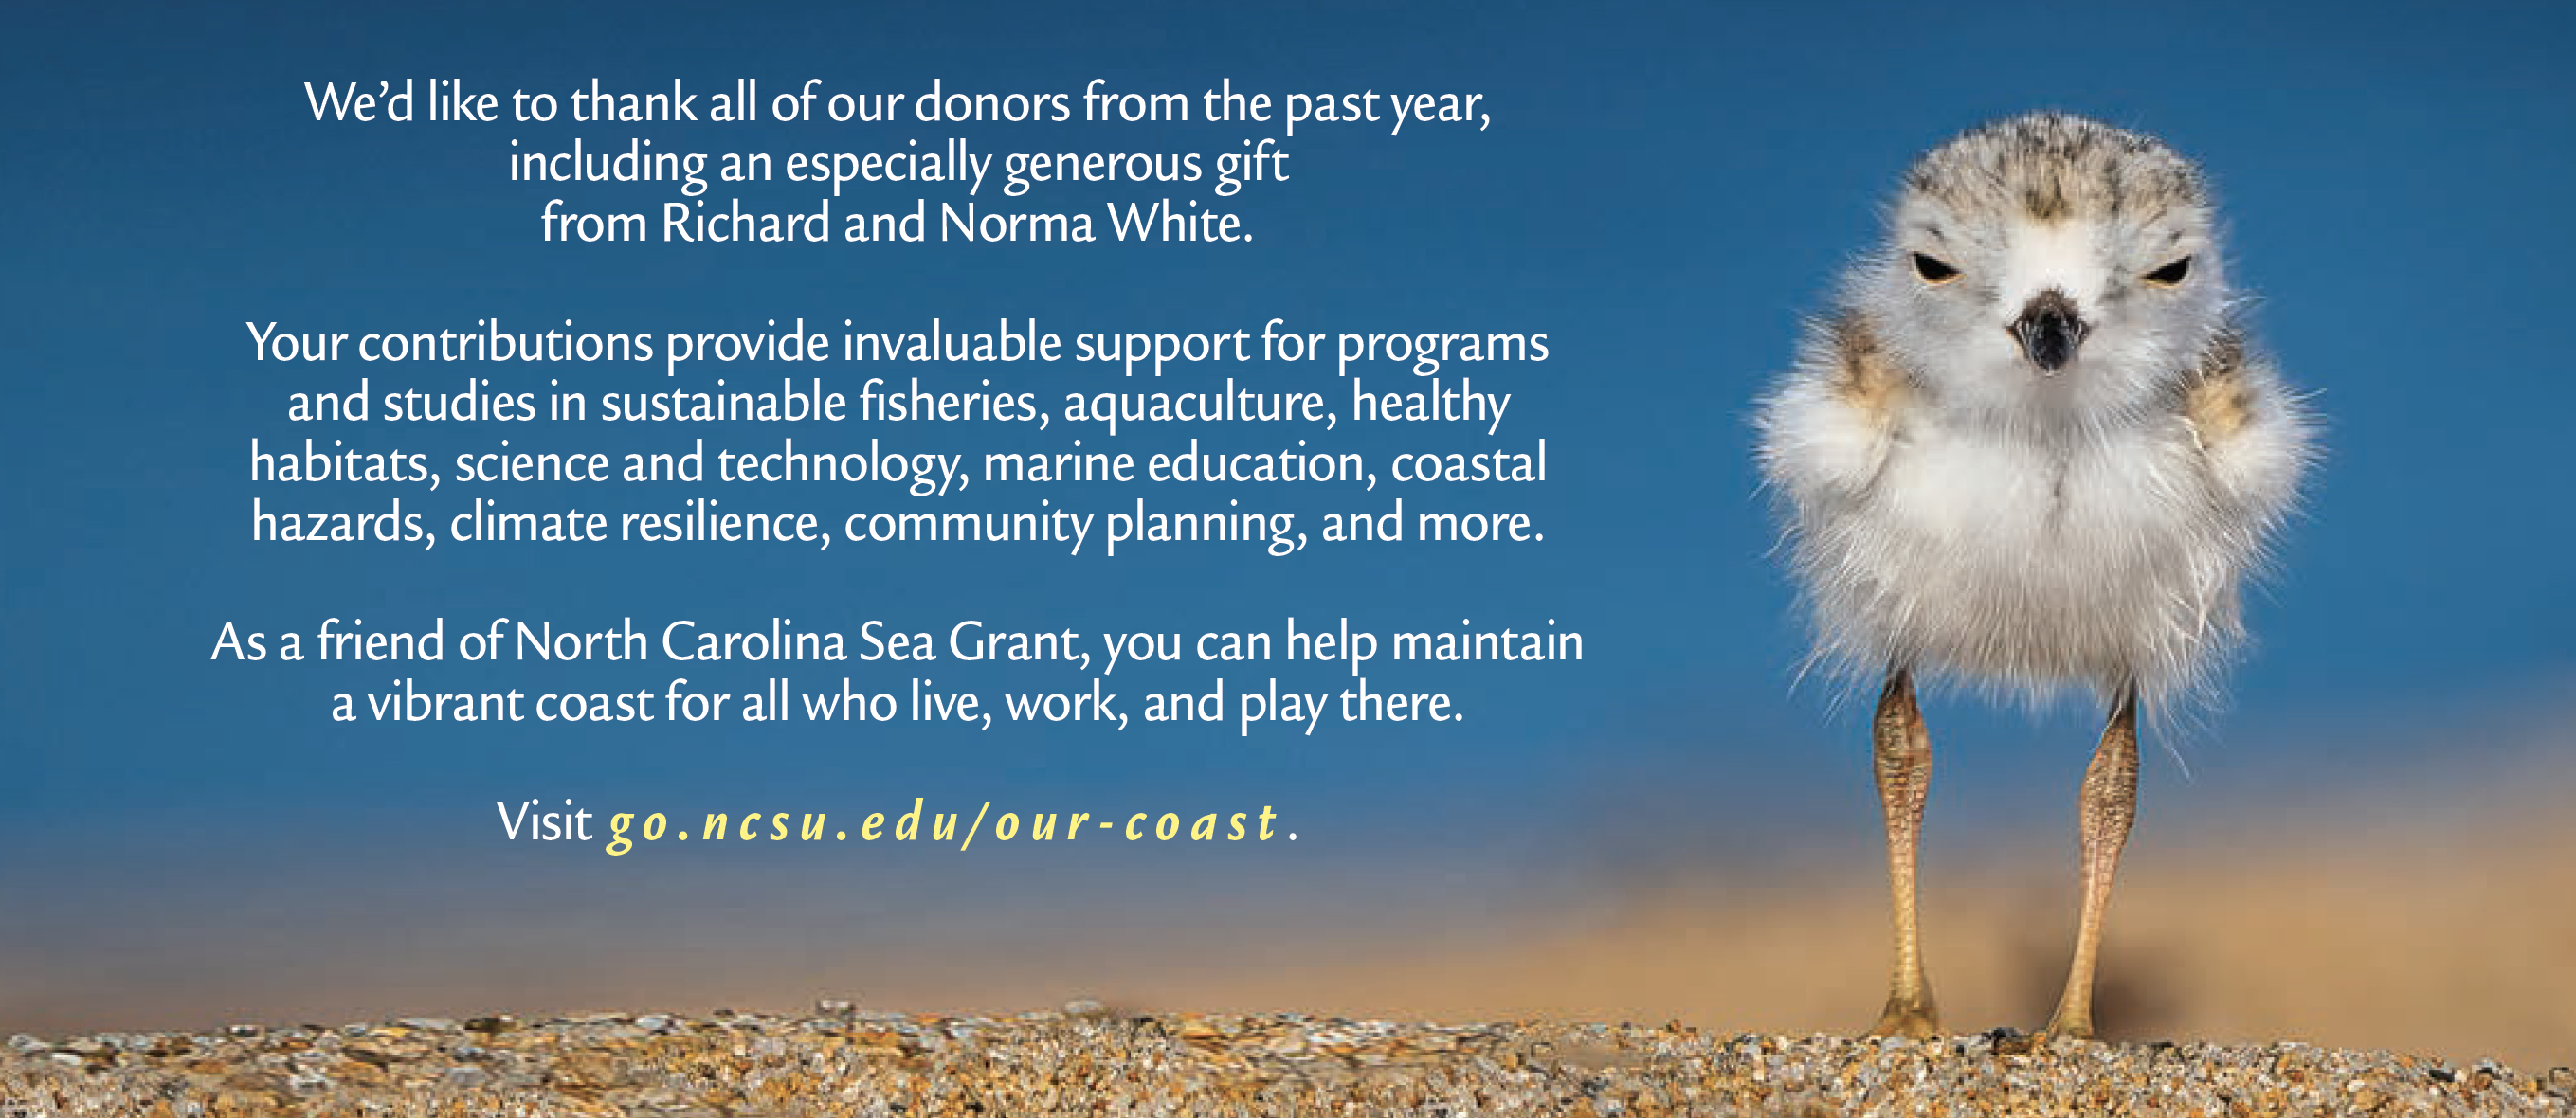 image: back cover of the Summer 2023 issue of Coastwatch, thanking donors and featuring a piping plover.